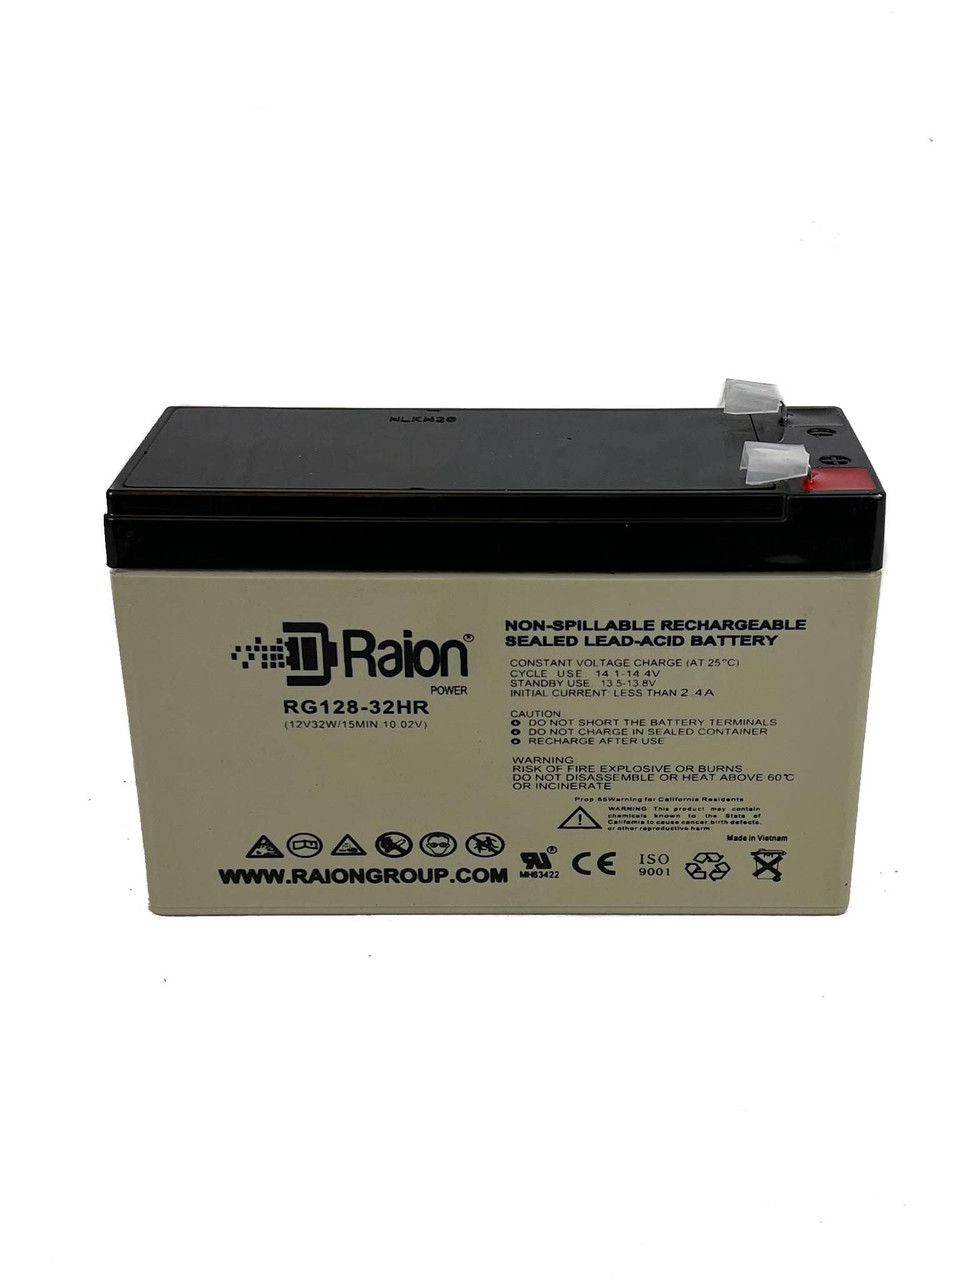 Raion Power RG128-32HR Replacement High Rate Battery Cartridge for APC Back-UPS 650VA BX650CI-AF